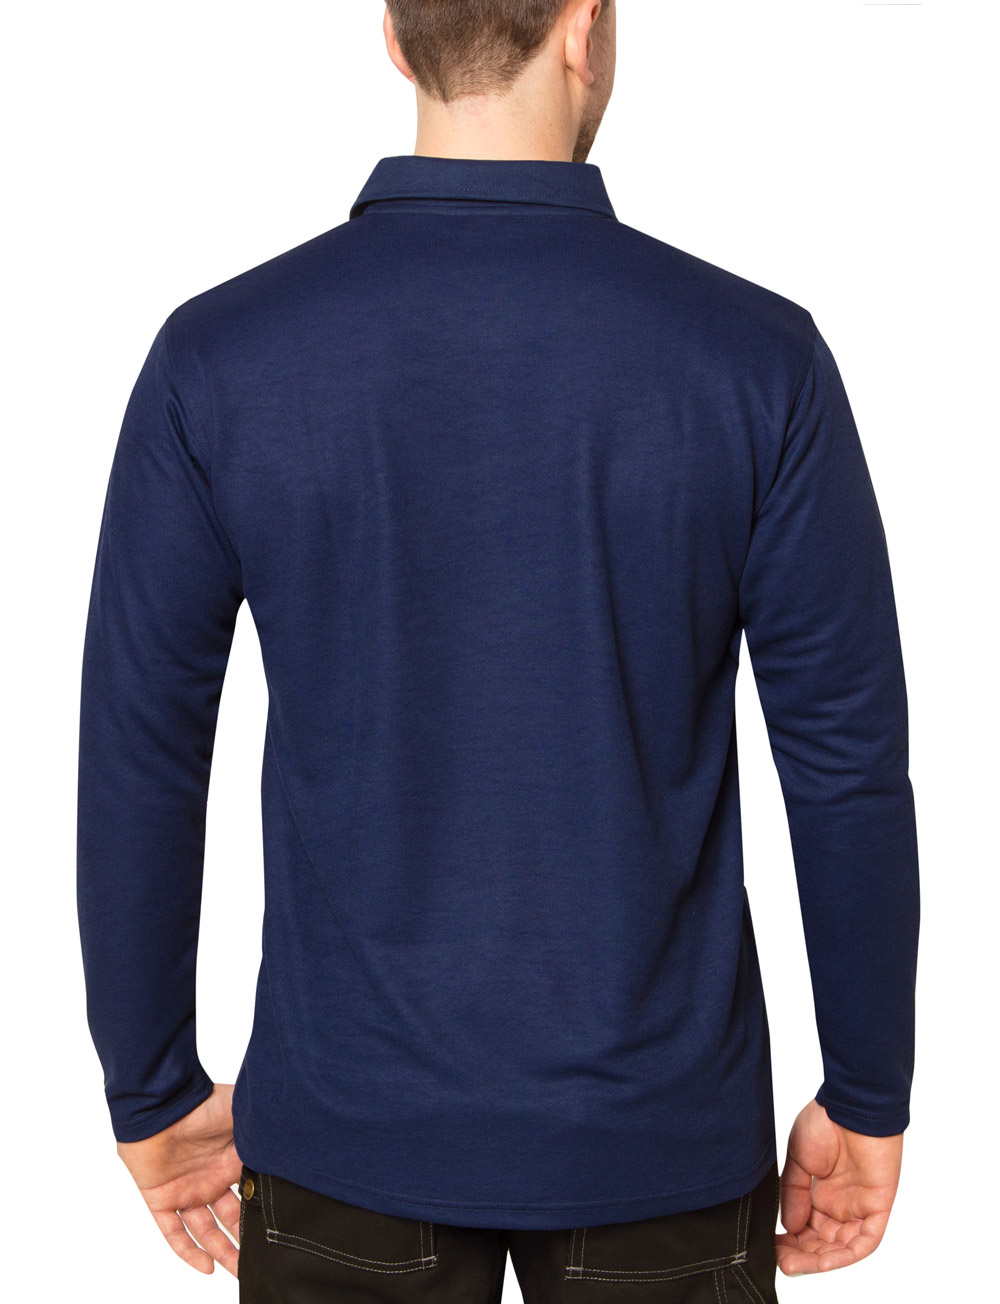 UV Polo Shirt Men's Long Sleeve Leisure and everyday wear